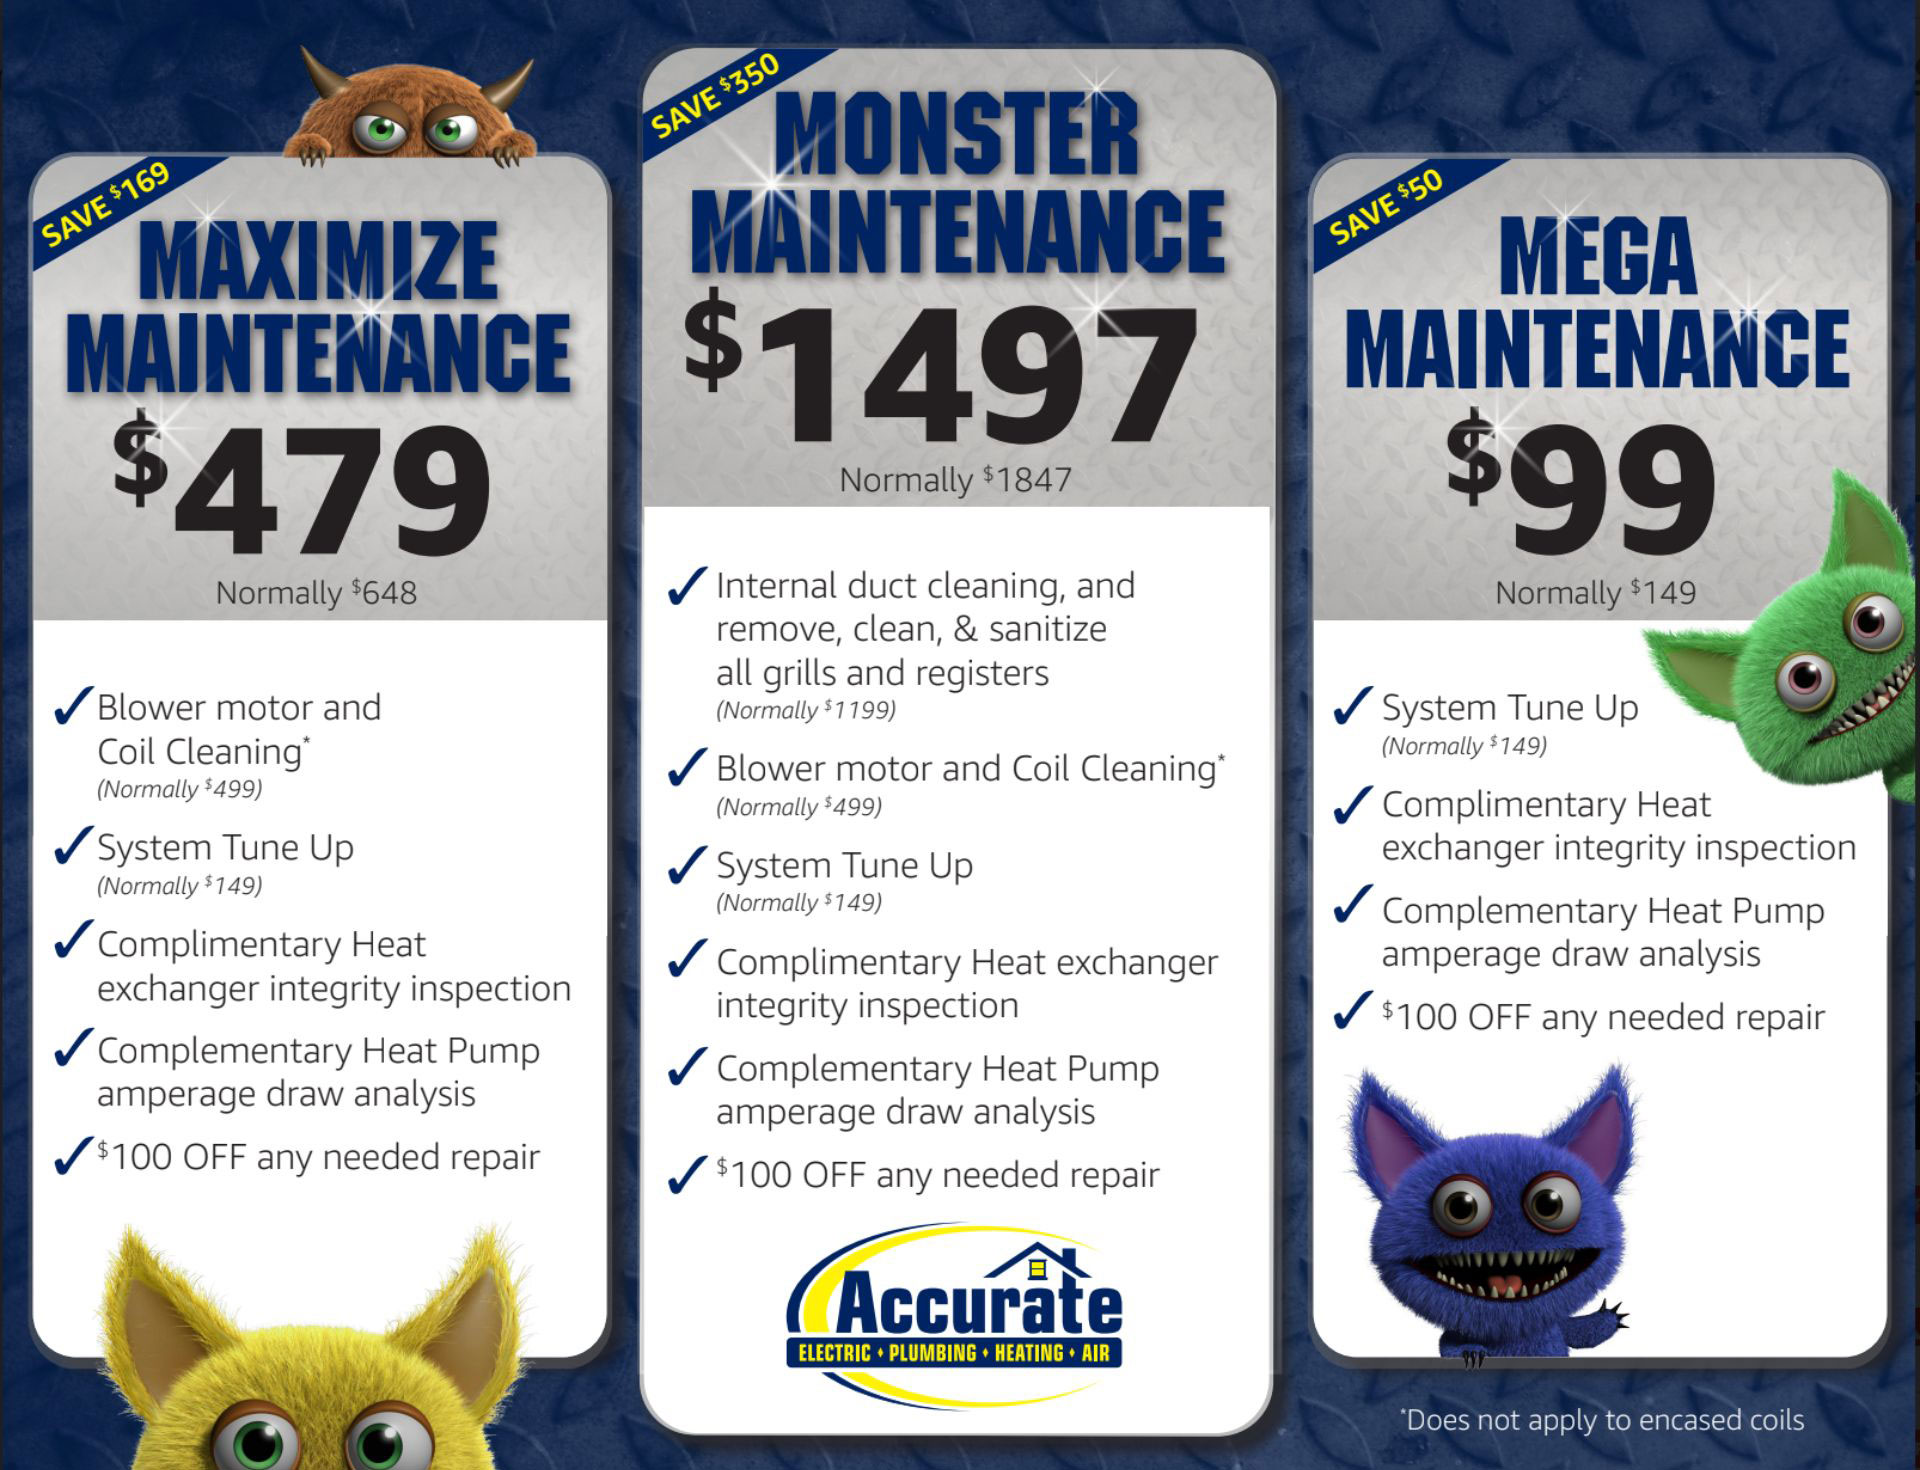 Monster HVAC Tune-Up Specials - Call for details!